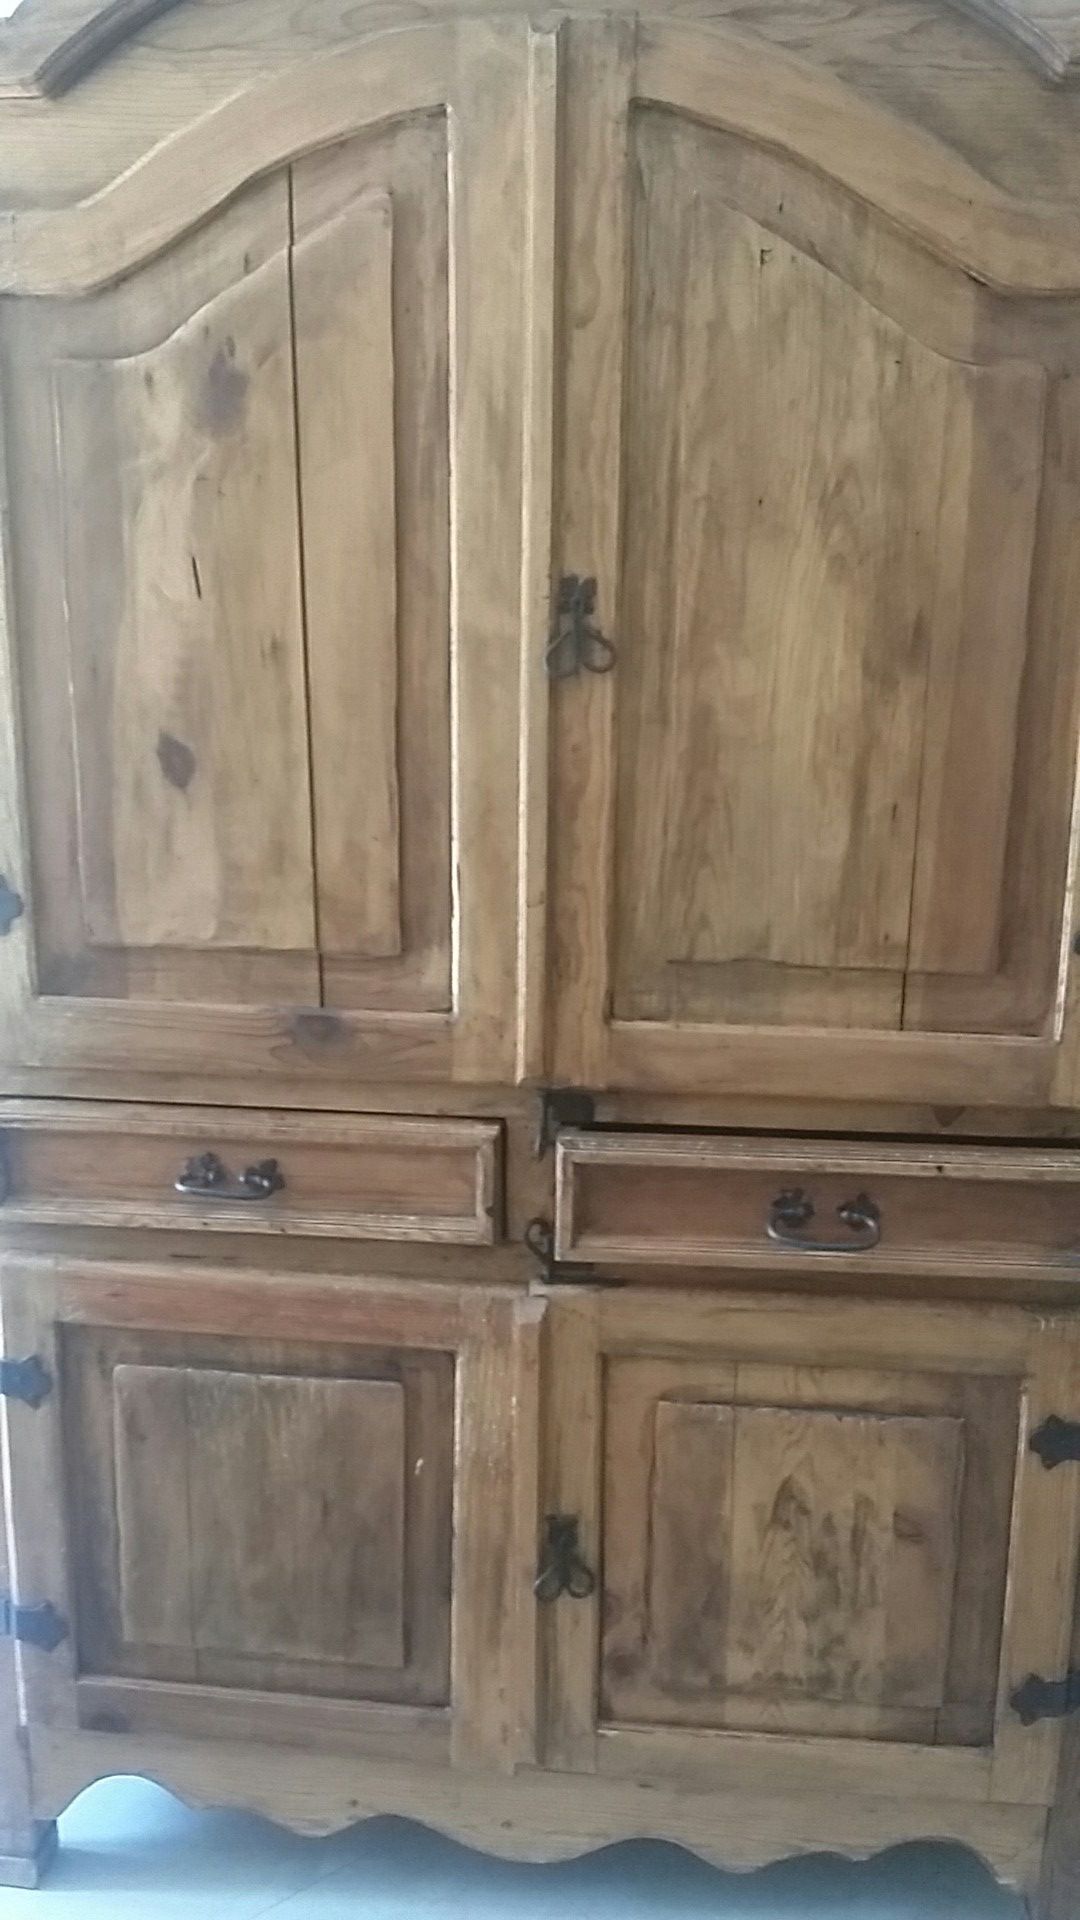 ARMOUIR 2 CABINETS 175.00 AND 135.00